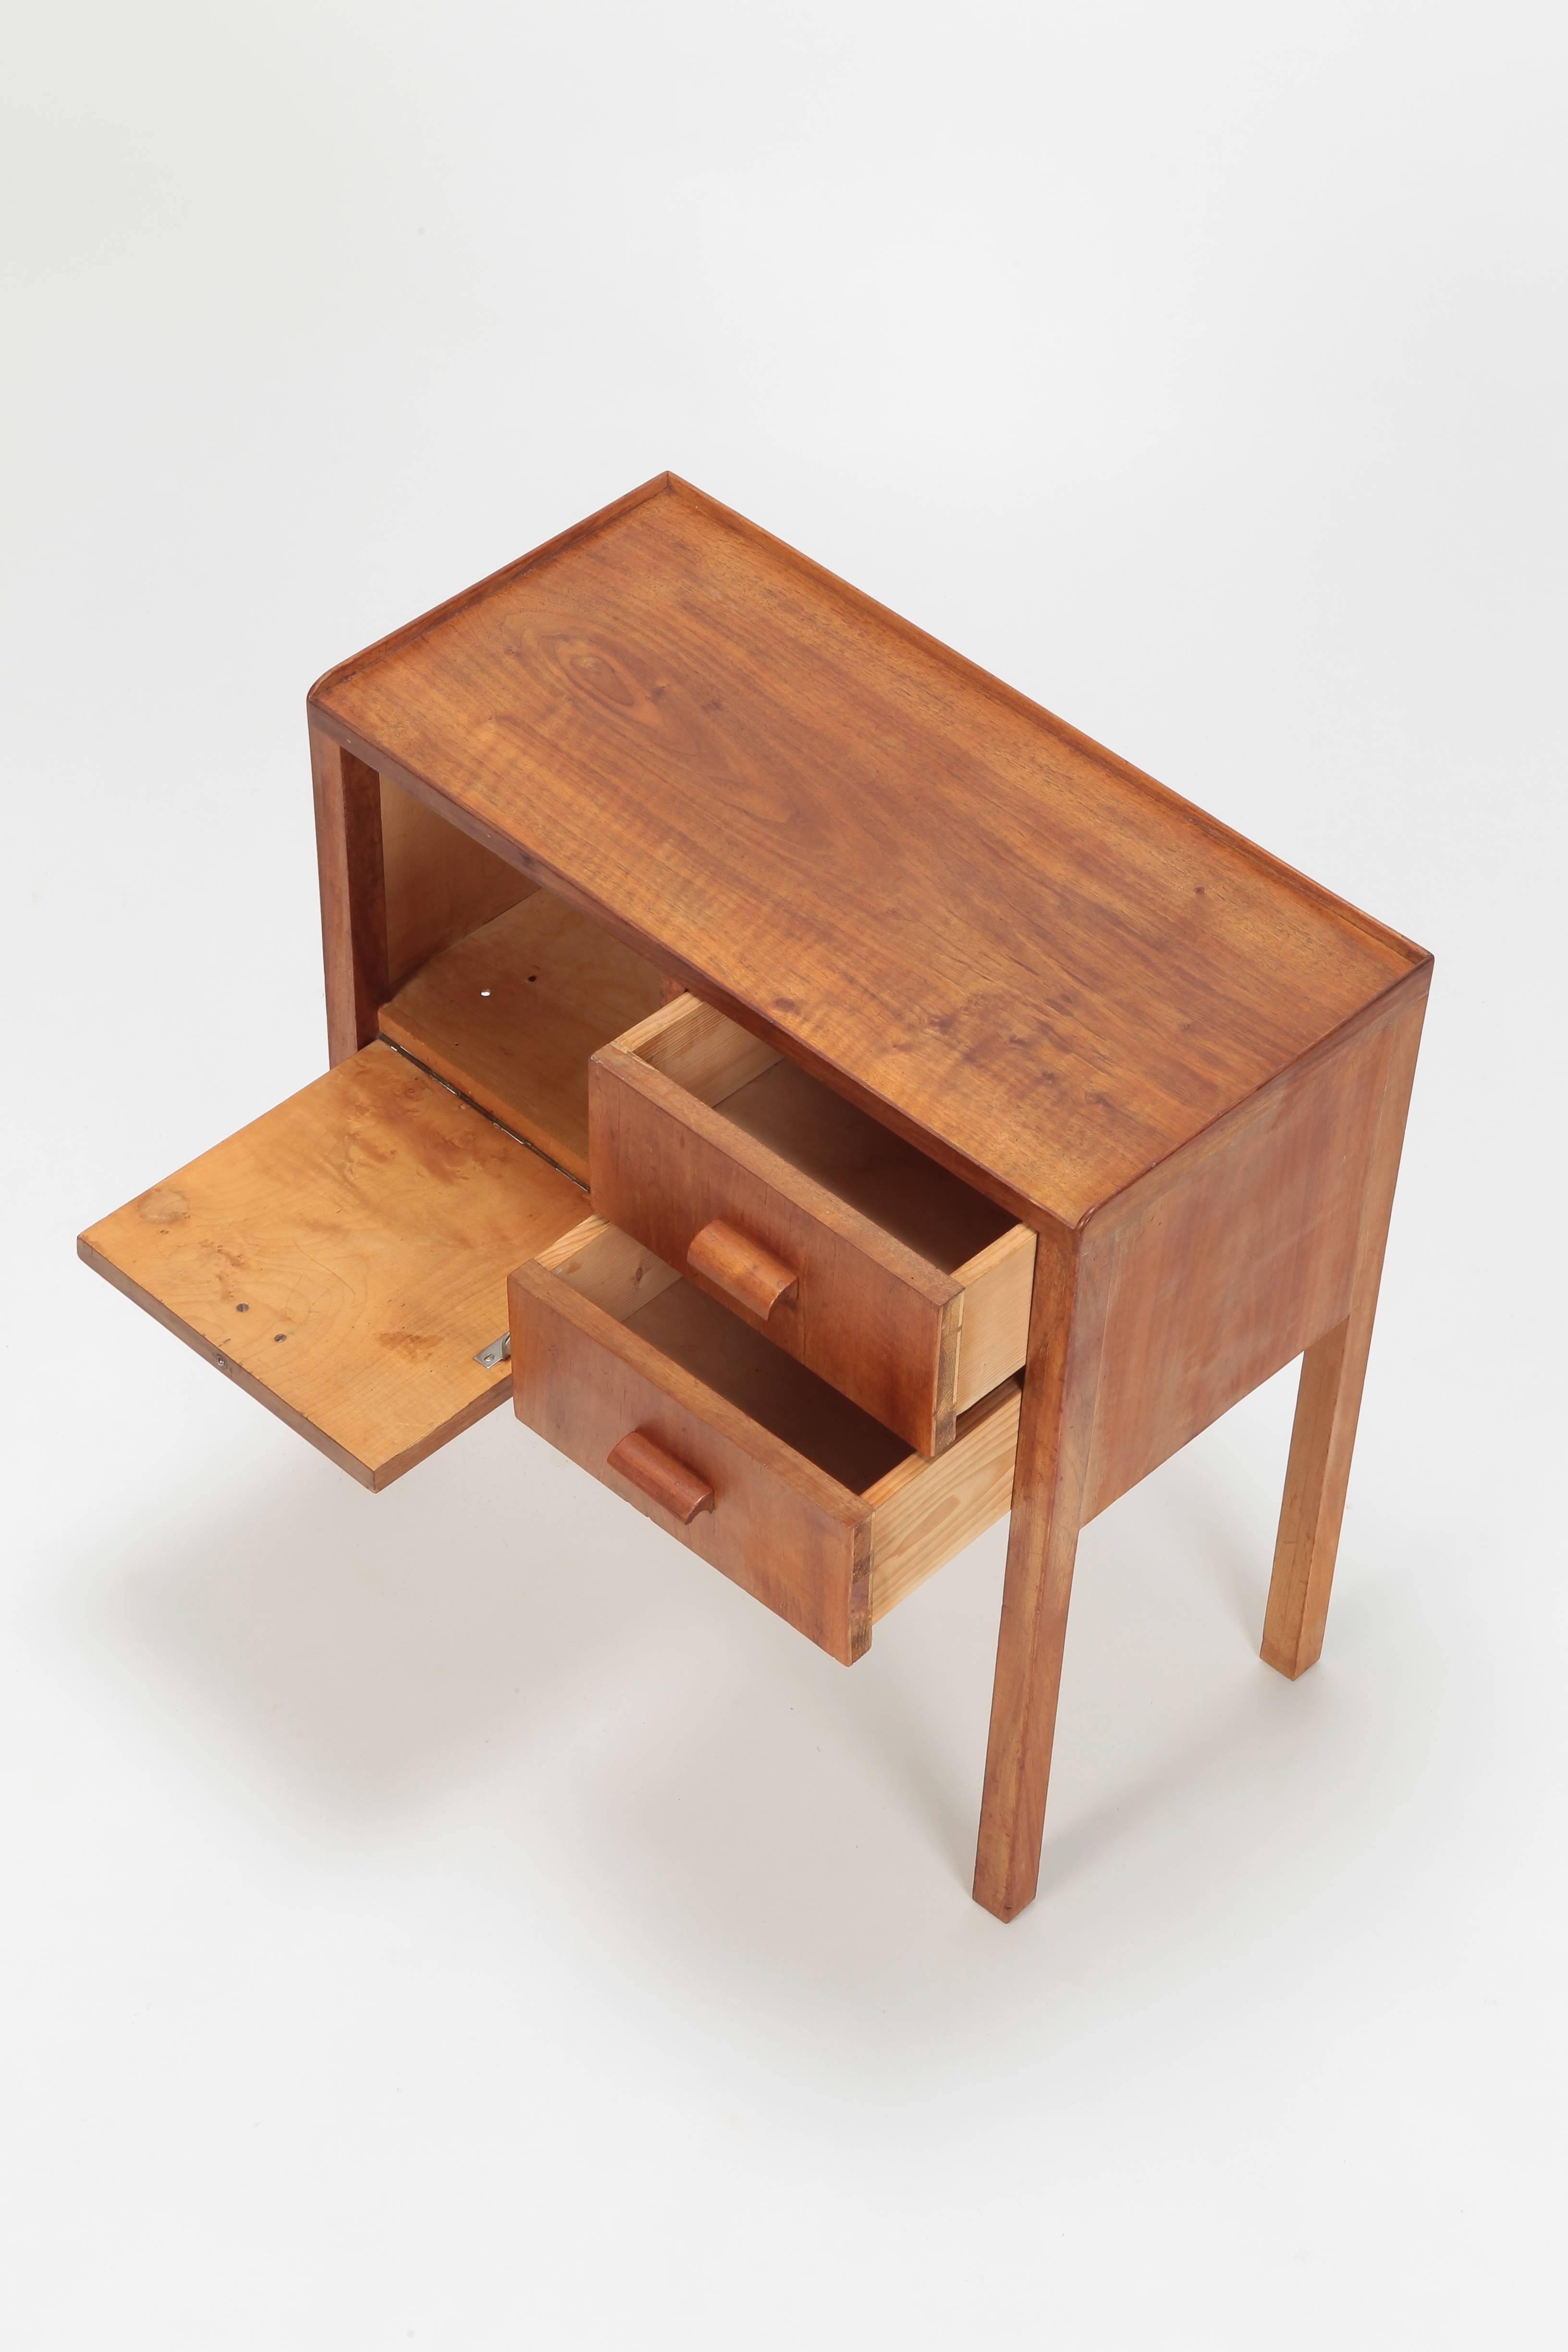 Max Ernst Häfeli birch entrée closet manufactured by Wohnbedarf in the 1940s. Can be used as a bedside table.